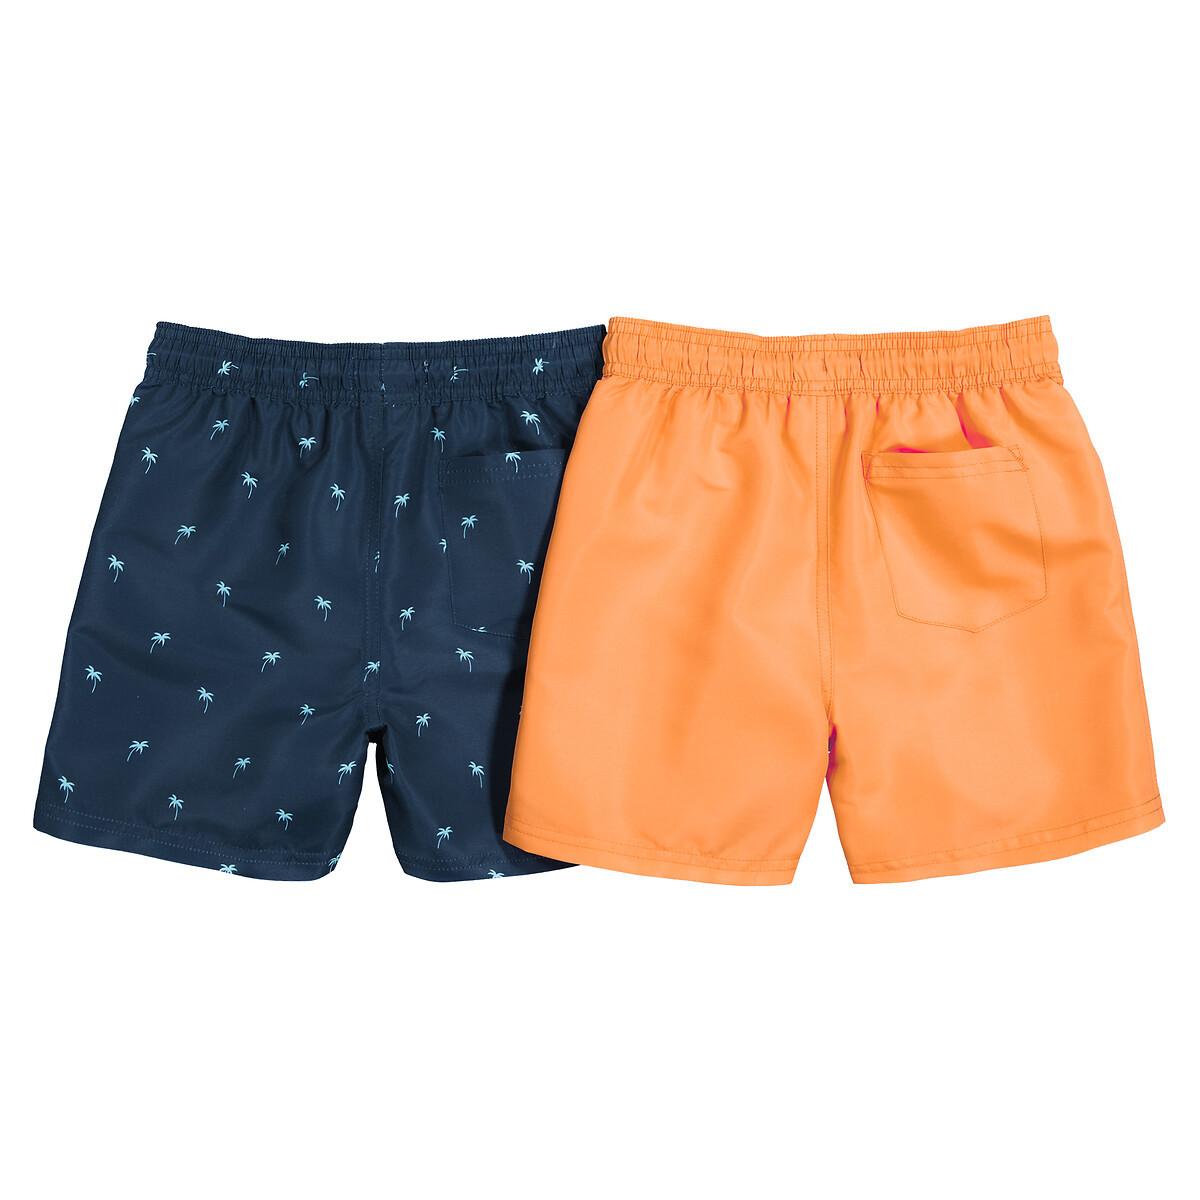 La Redoute Collections  2er-Pack Badeshorts 